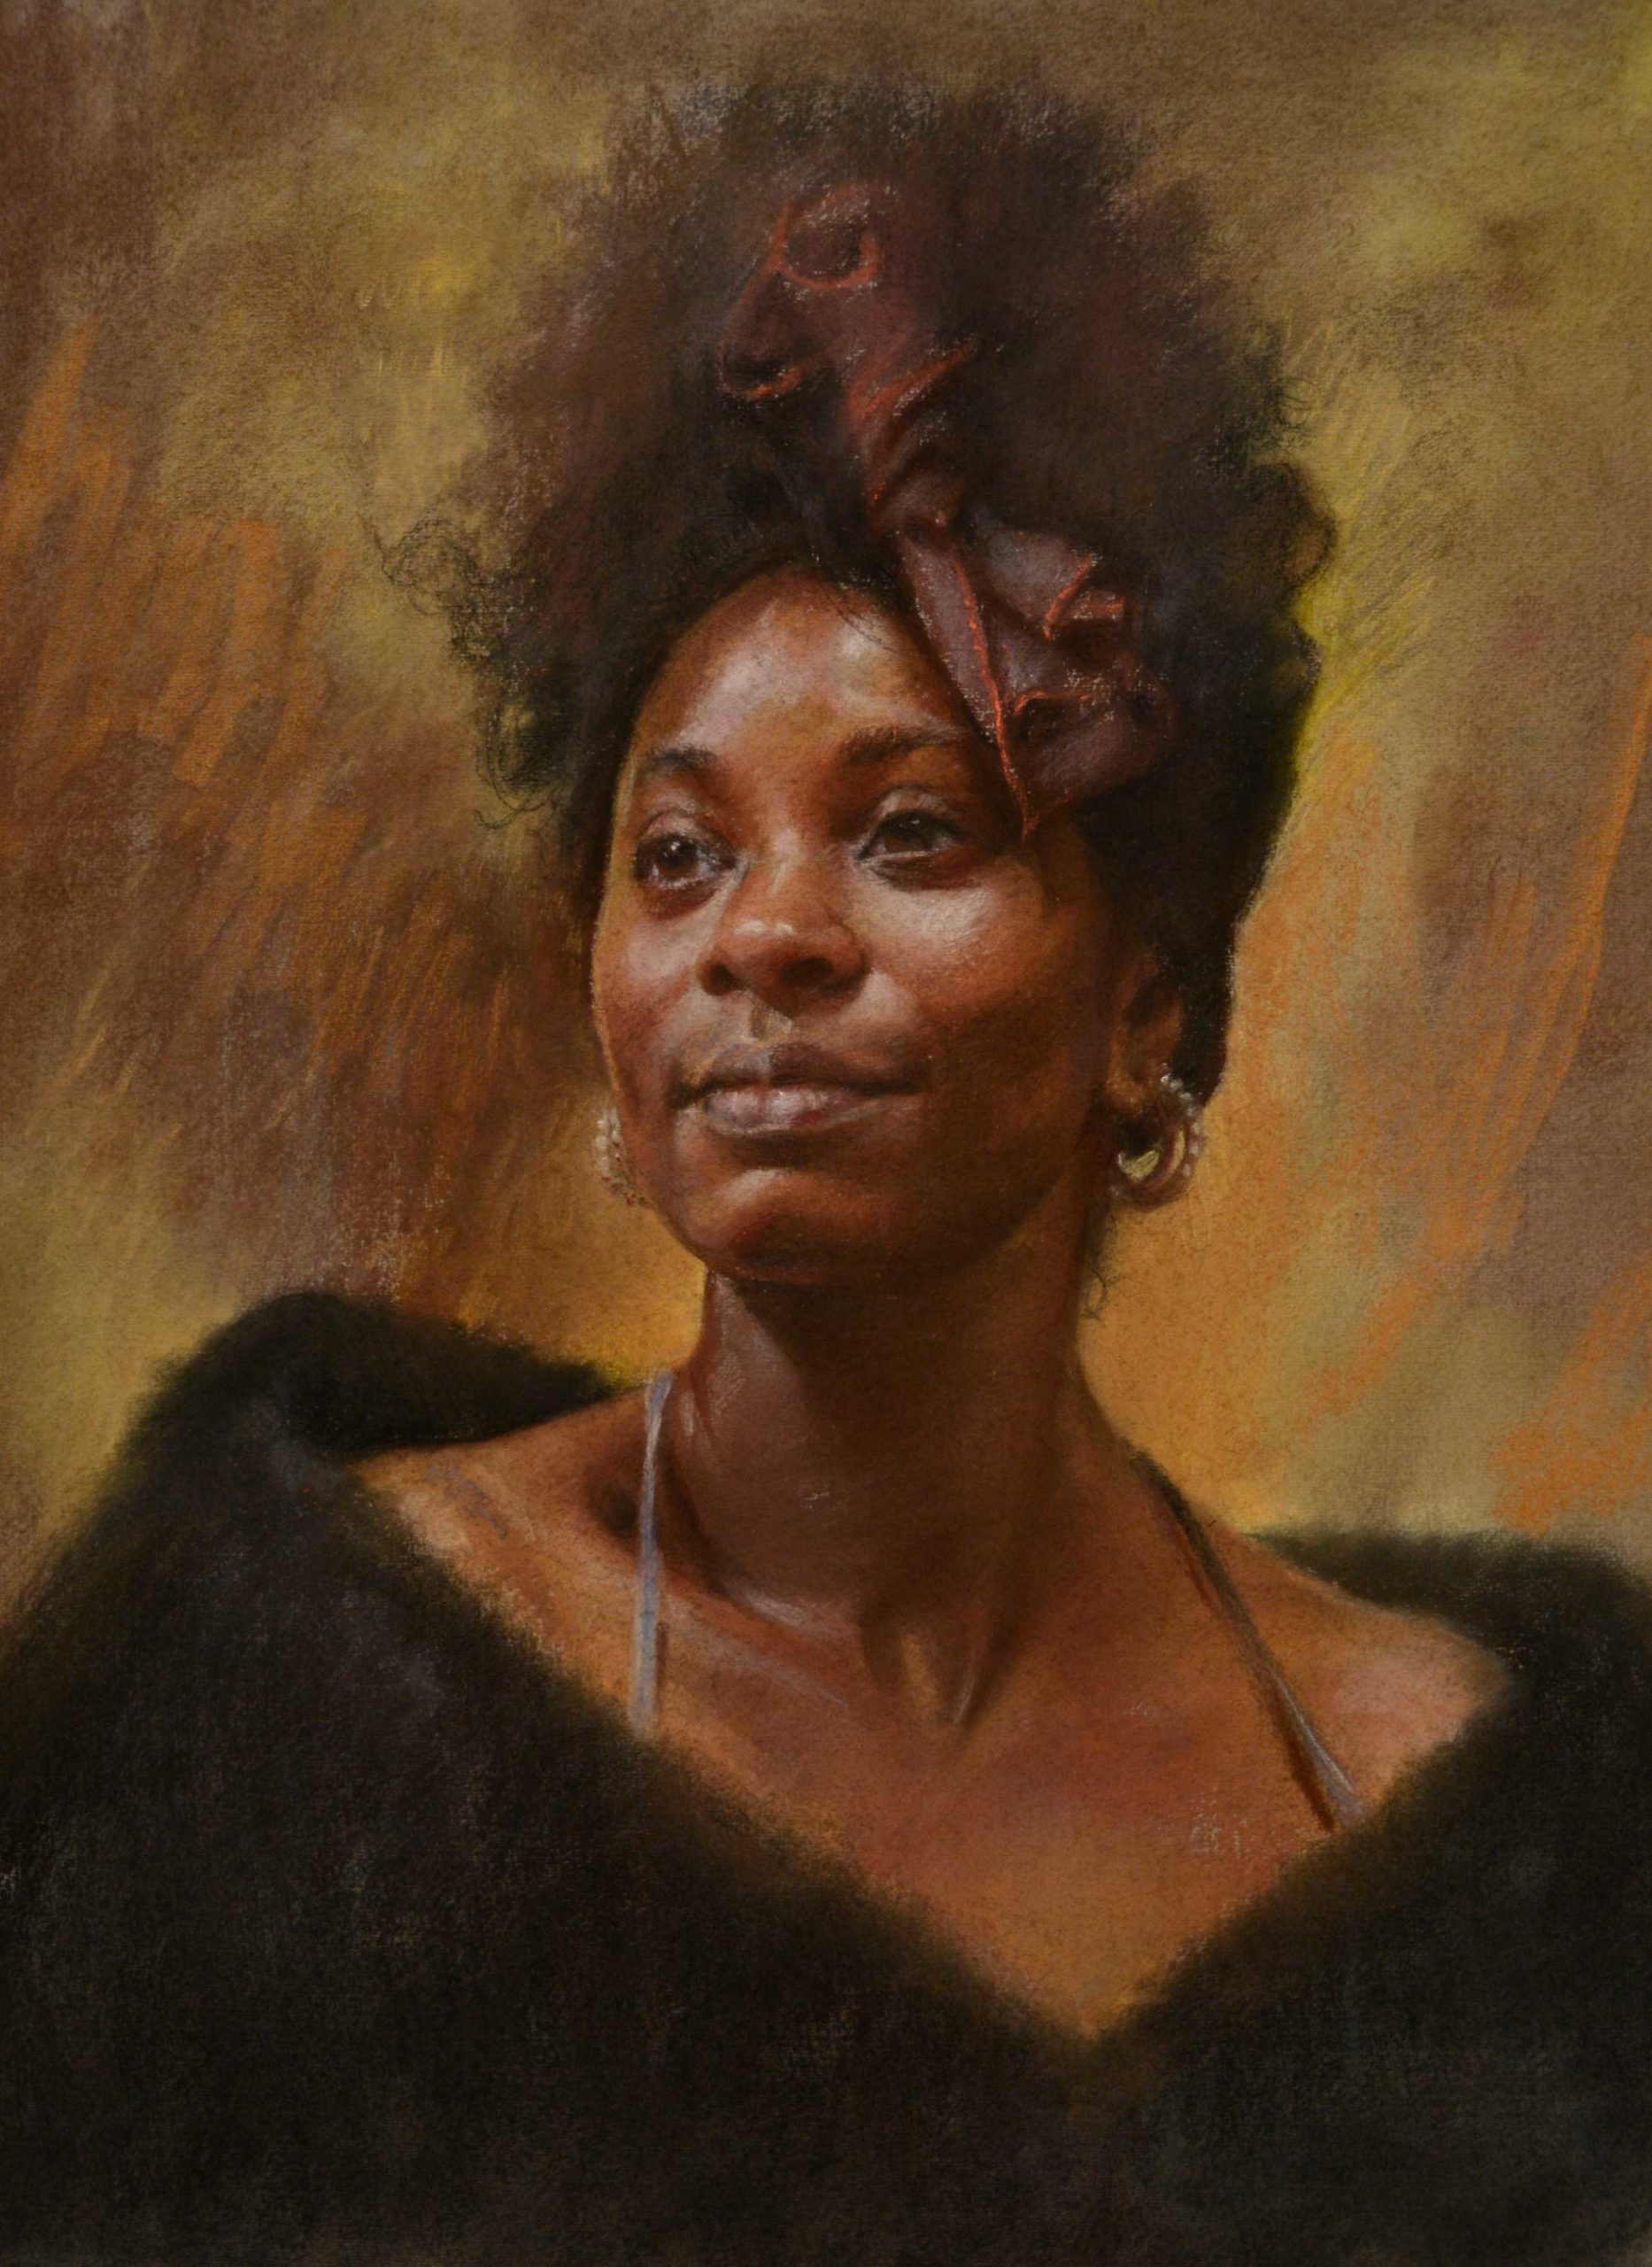 Lenin Delsol, “Black and Gold,” Pastel, 24 x 19 in.